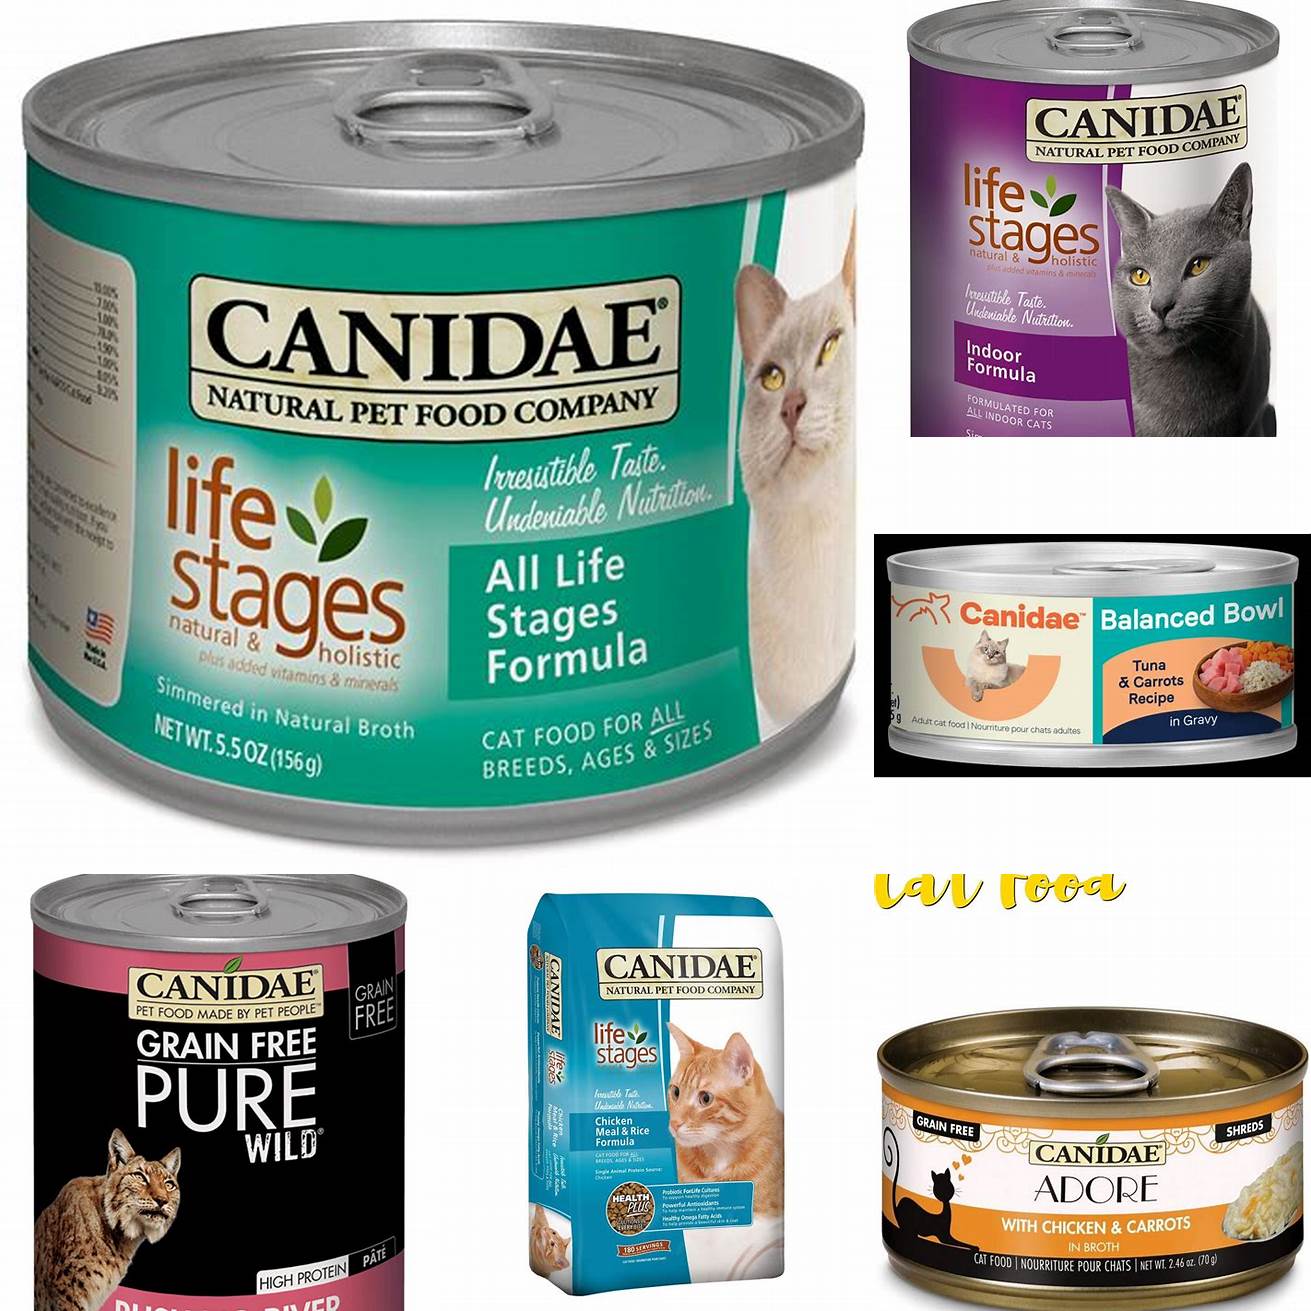 Canidae Wet Cat Food comes in a range of flavors that your cat is sure to love